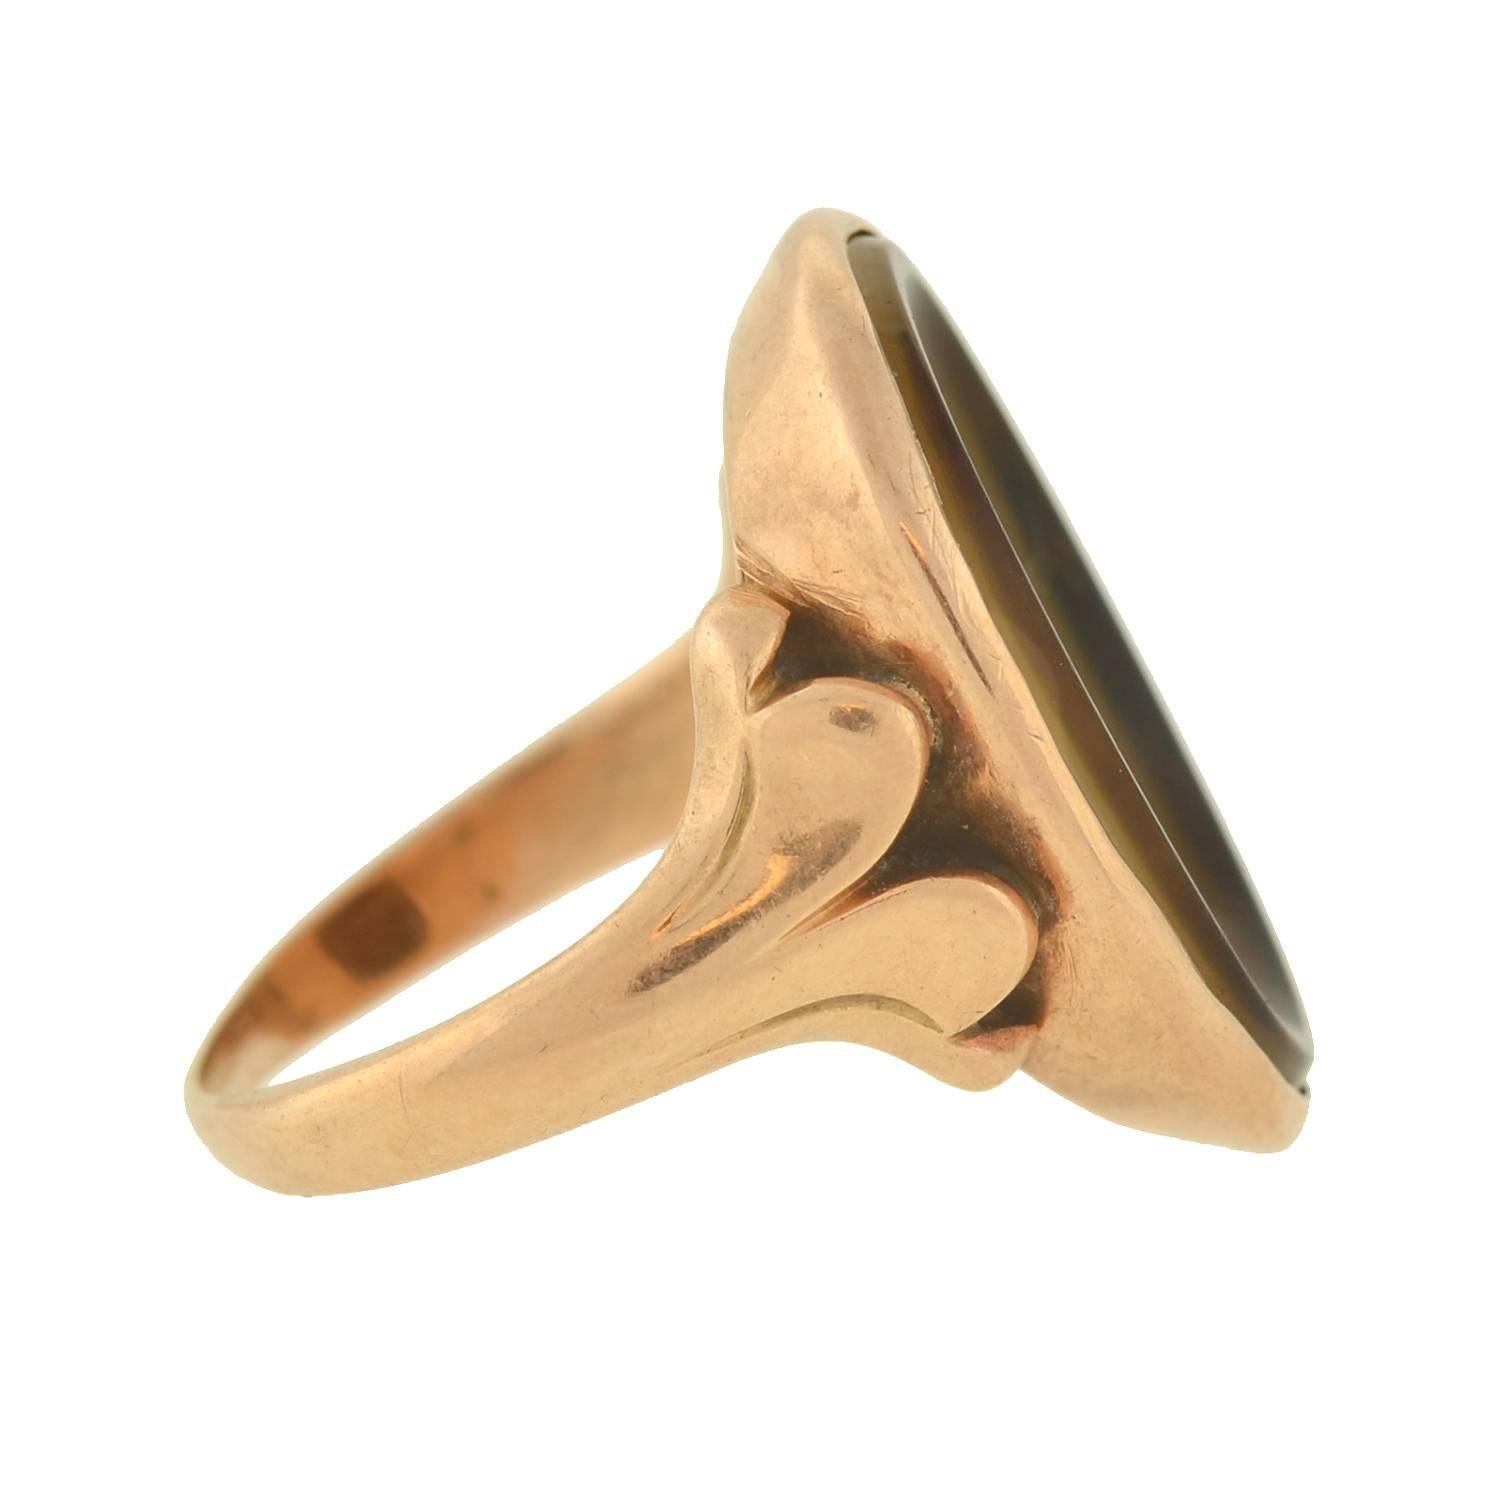 This unusual ring from the late Georgian era (ca1830) is truly one-of-a-kind! Crafted in 14kt gold, the beautiful design features a unique banded agate centerpiece. The hand-carved stone is concave in shape, forming an open basin with a smoothly